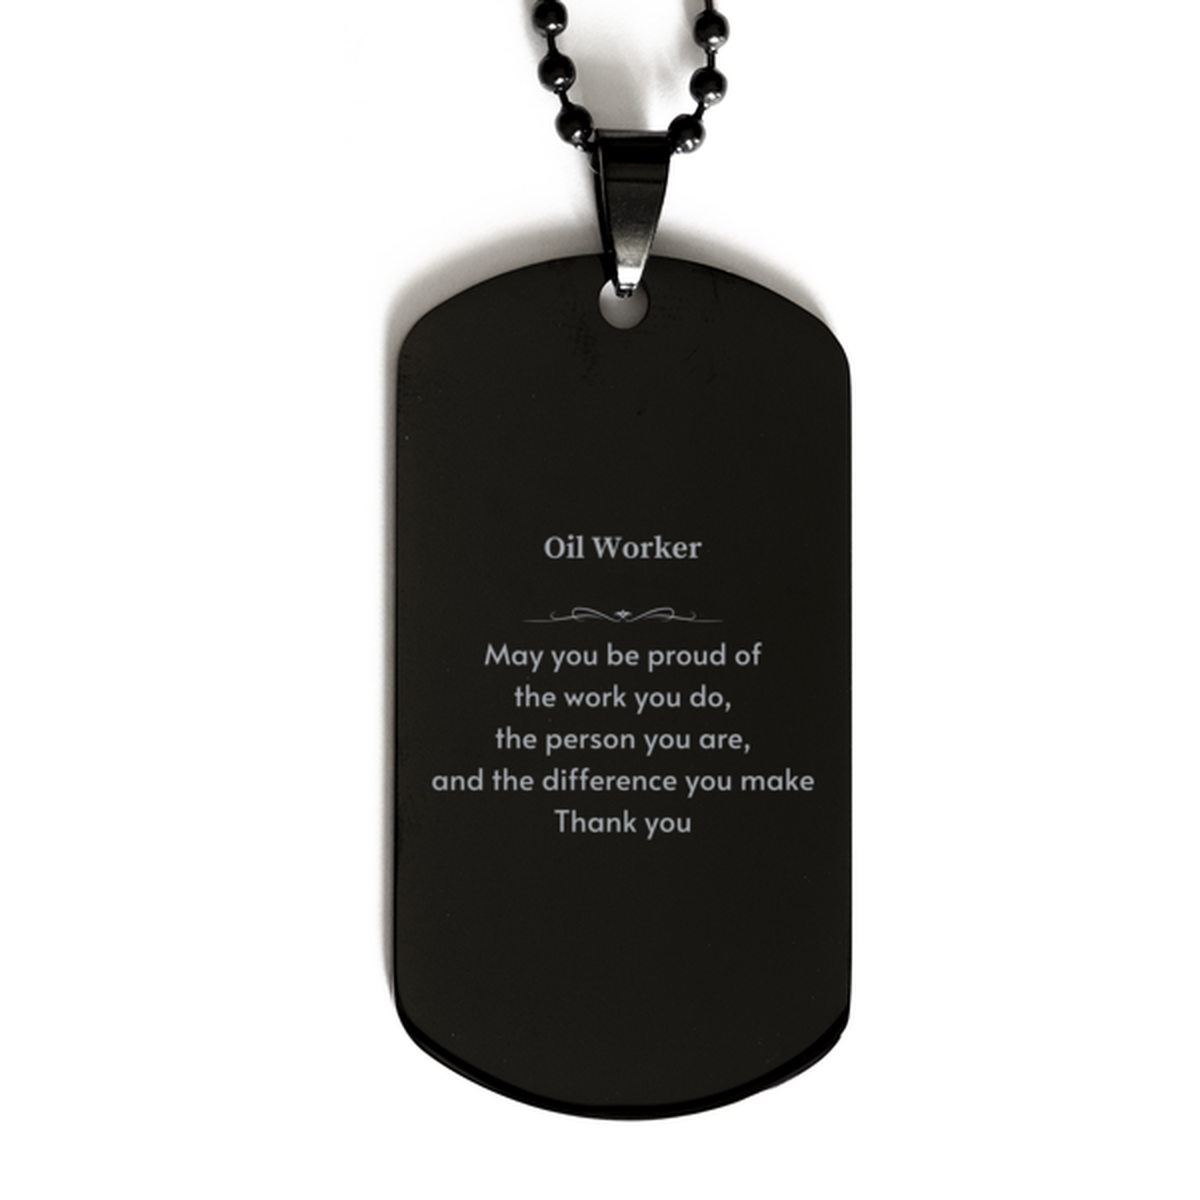 Heartwarming Black Dog Tag Retirement Coworkers Gifts for Oil Worker, Oil Worker May You be proud of the work you do, the person you are Gifts for Boss Men Women Friends